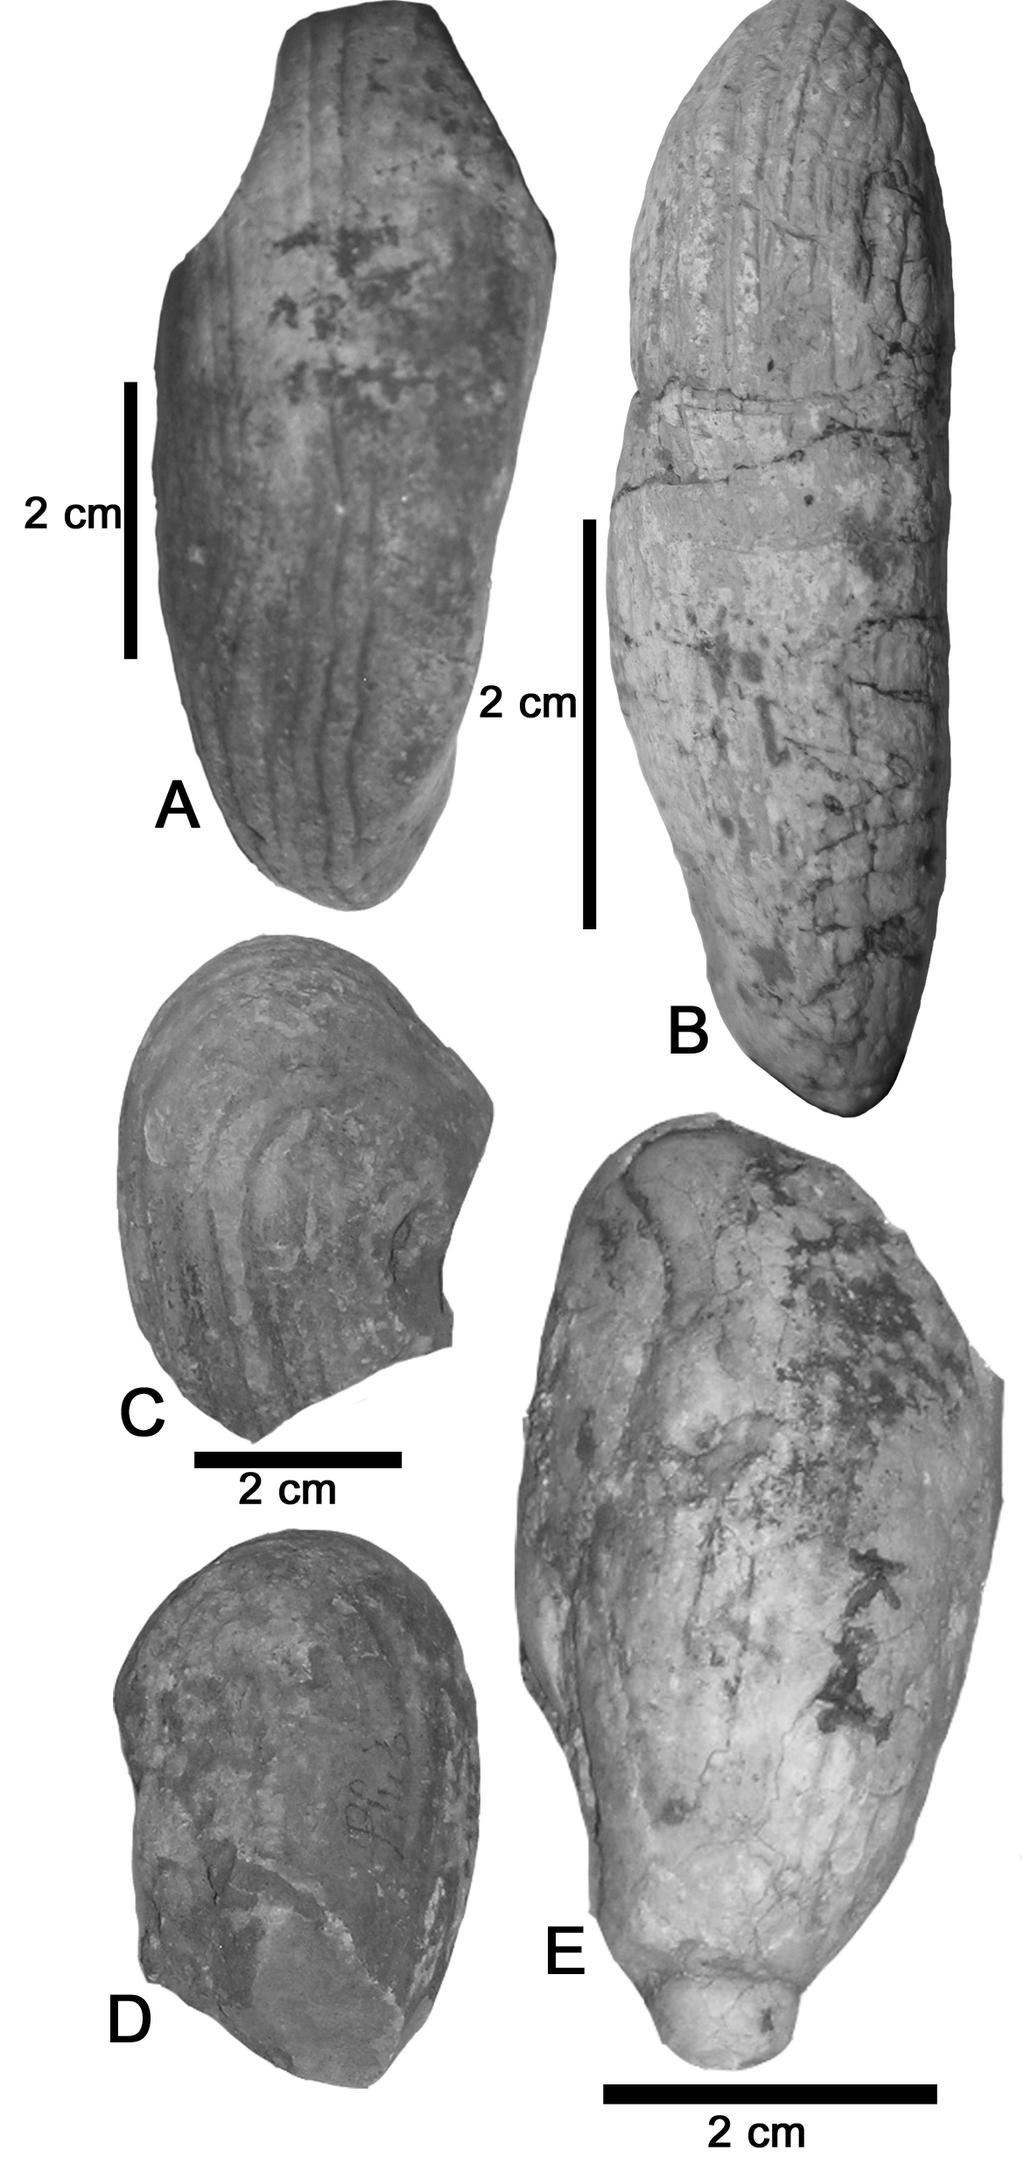 91 Saurocopros, Liassocopros) the maximum diameter is near the posterior end of the tightly-coiled portion of the coprolite, and the portion of the coprolite posterior to the spiral demarcation